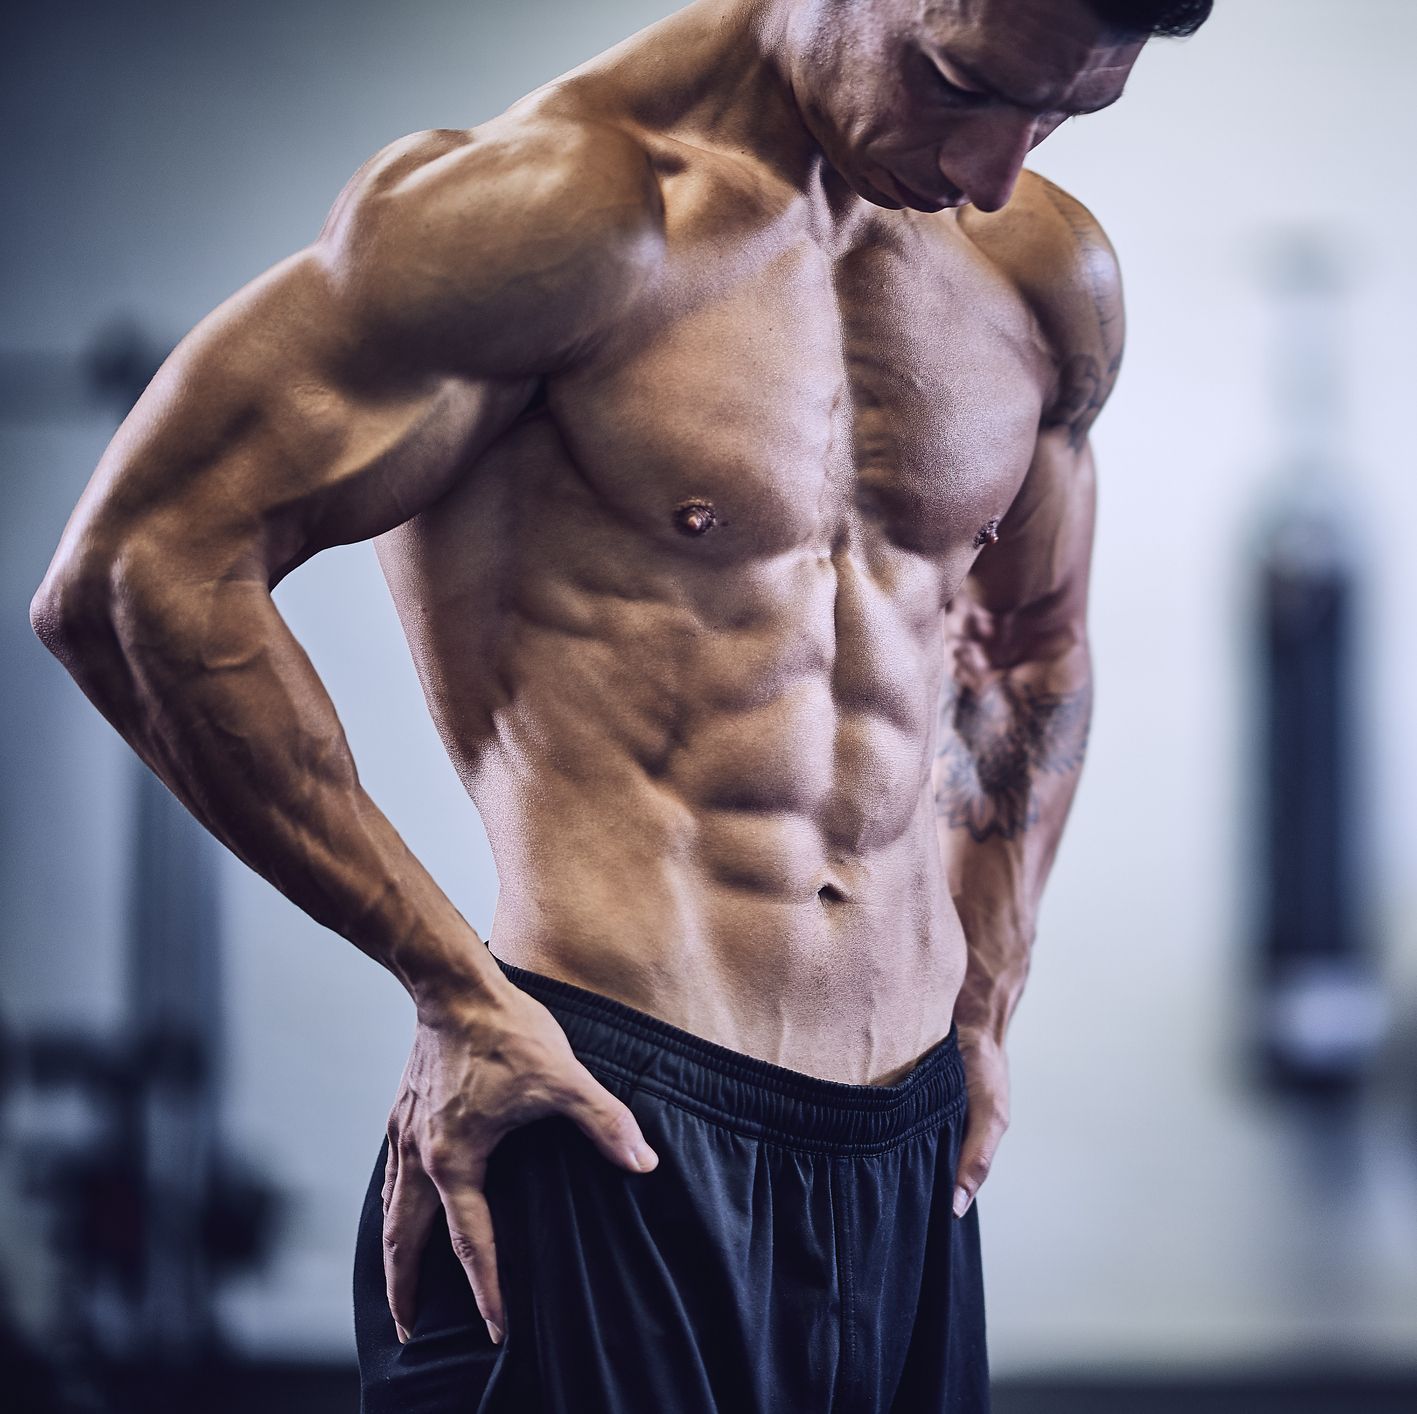 The Core Muscle You Need to Train to Max Out Your Athletic Performance